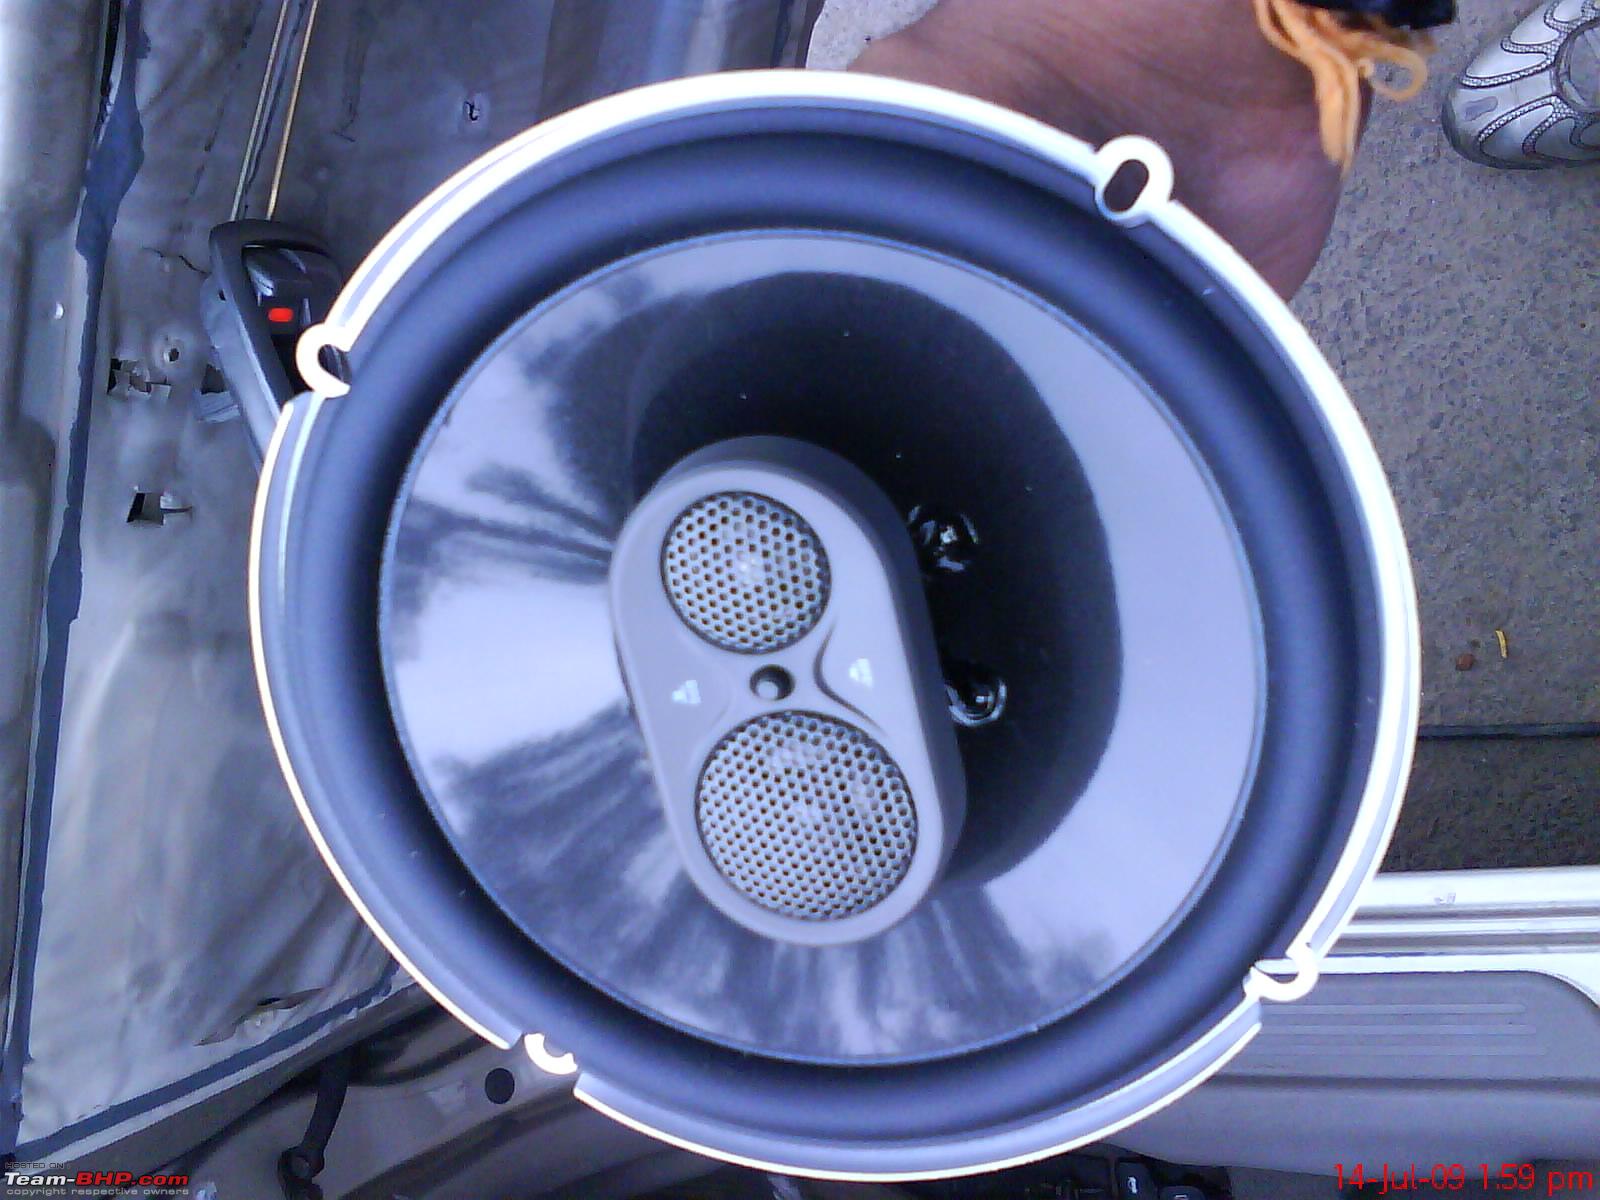 JBL GTO638 Series doubts- Are they Original or Fake? - Team-BHP